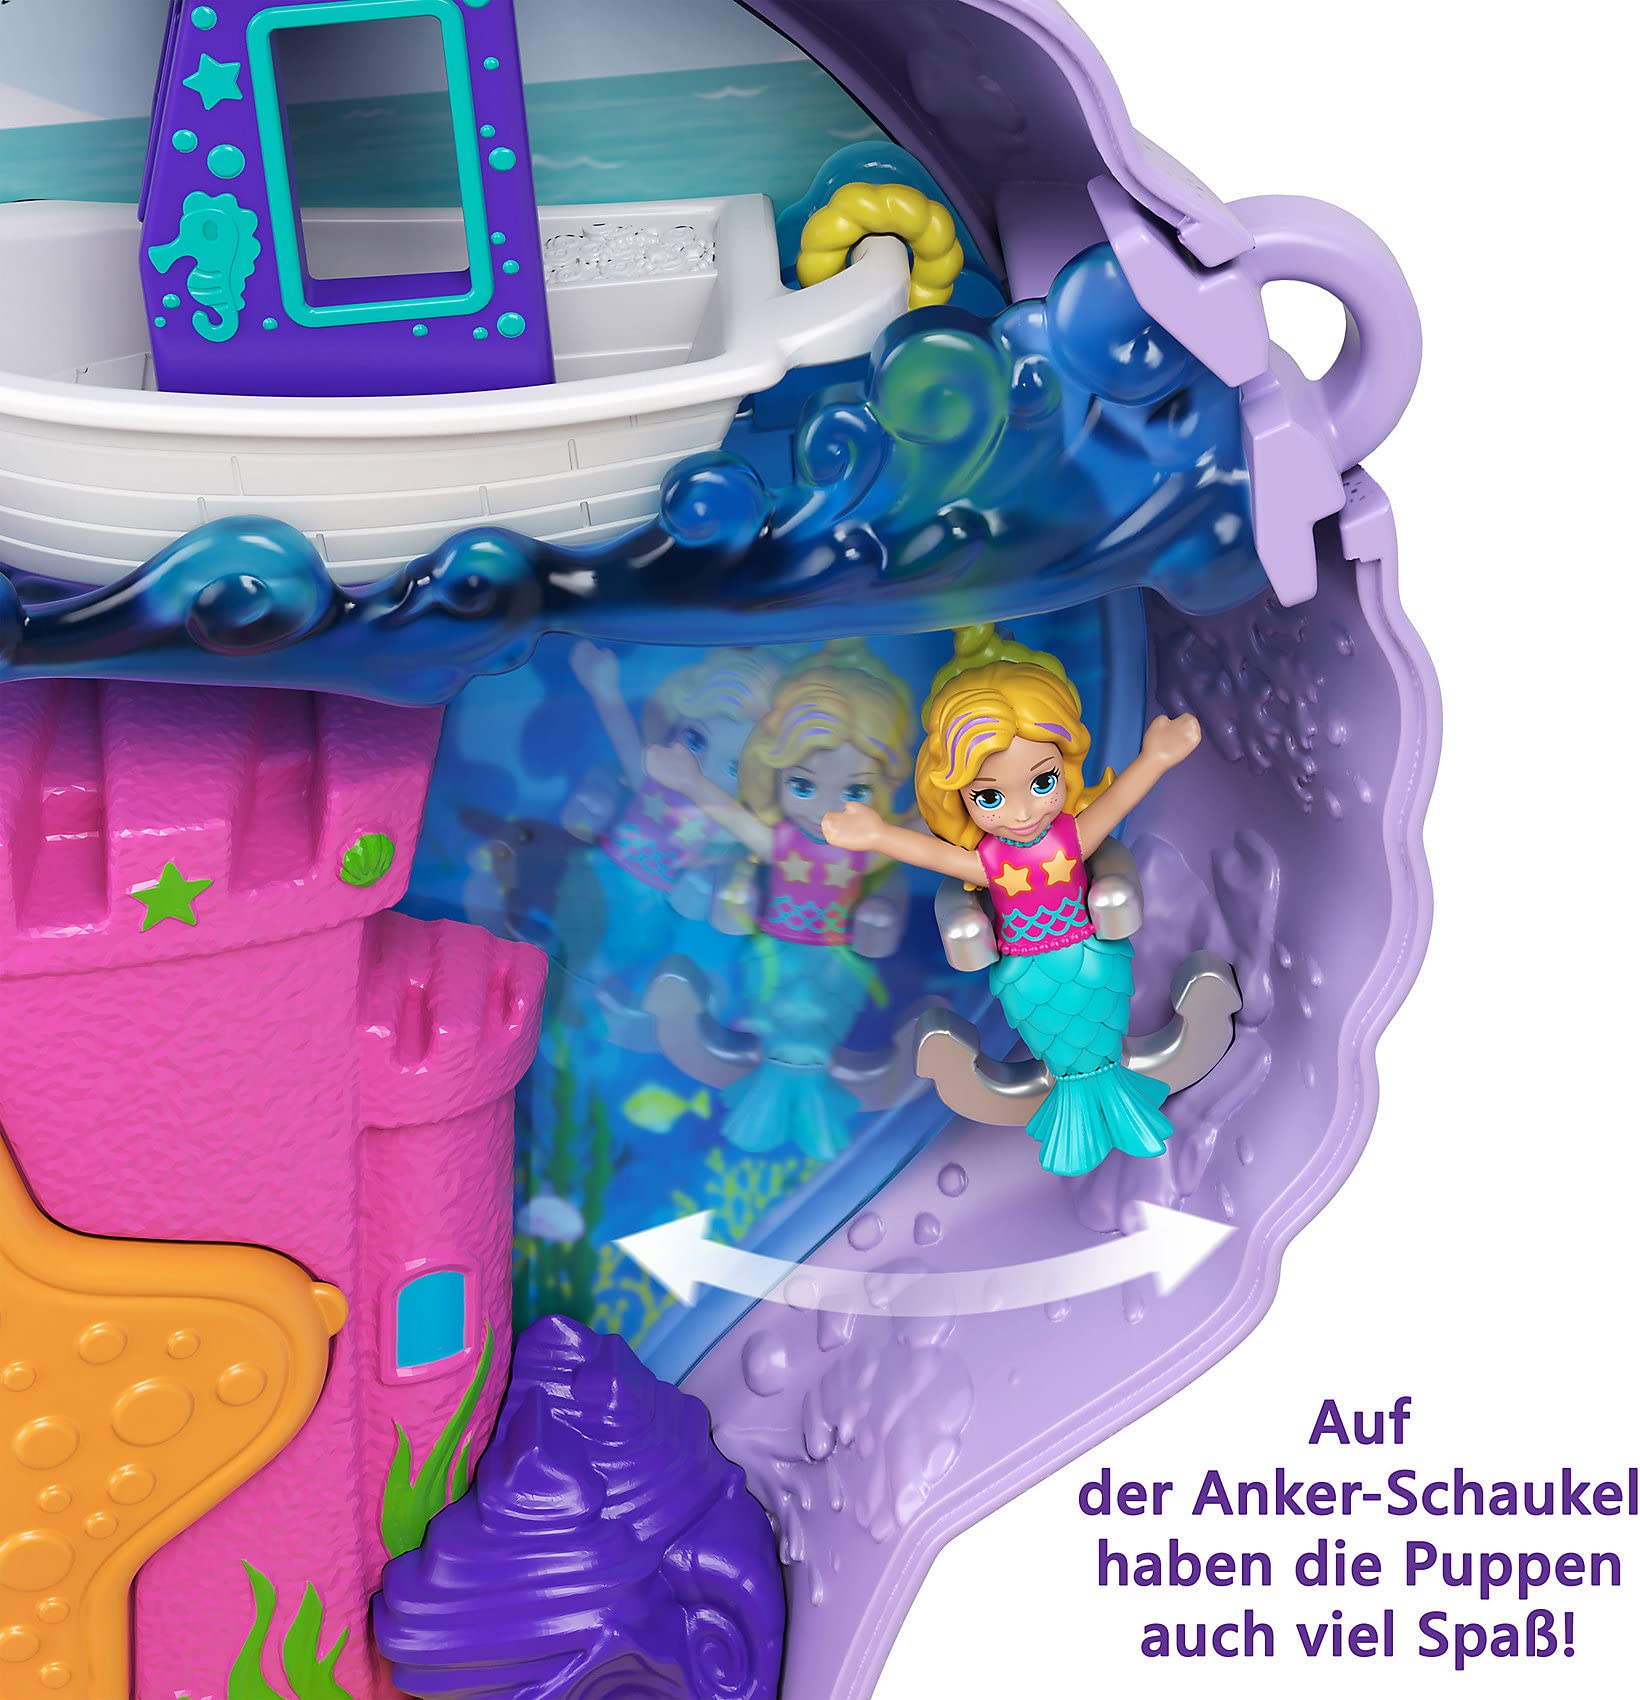 Polly Pocket Travel Toy with Micro Dolls & Accessories, Mermaid 2-In-1 Seashell Purse Playset (Amazon Exclusive)